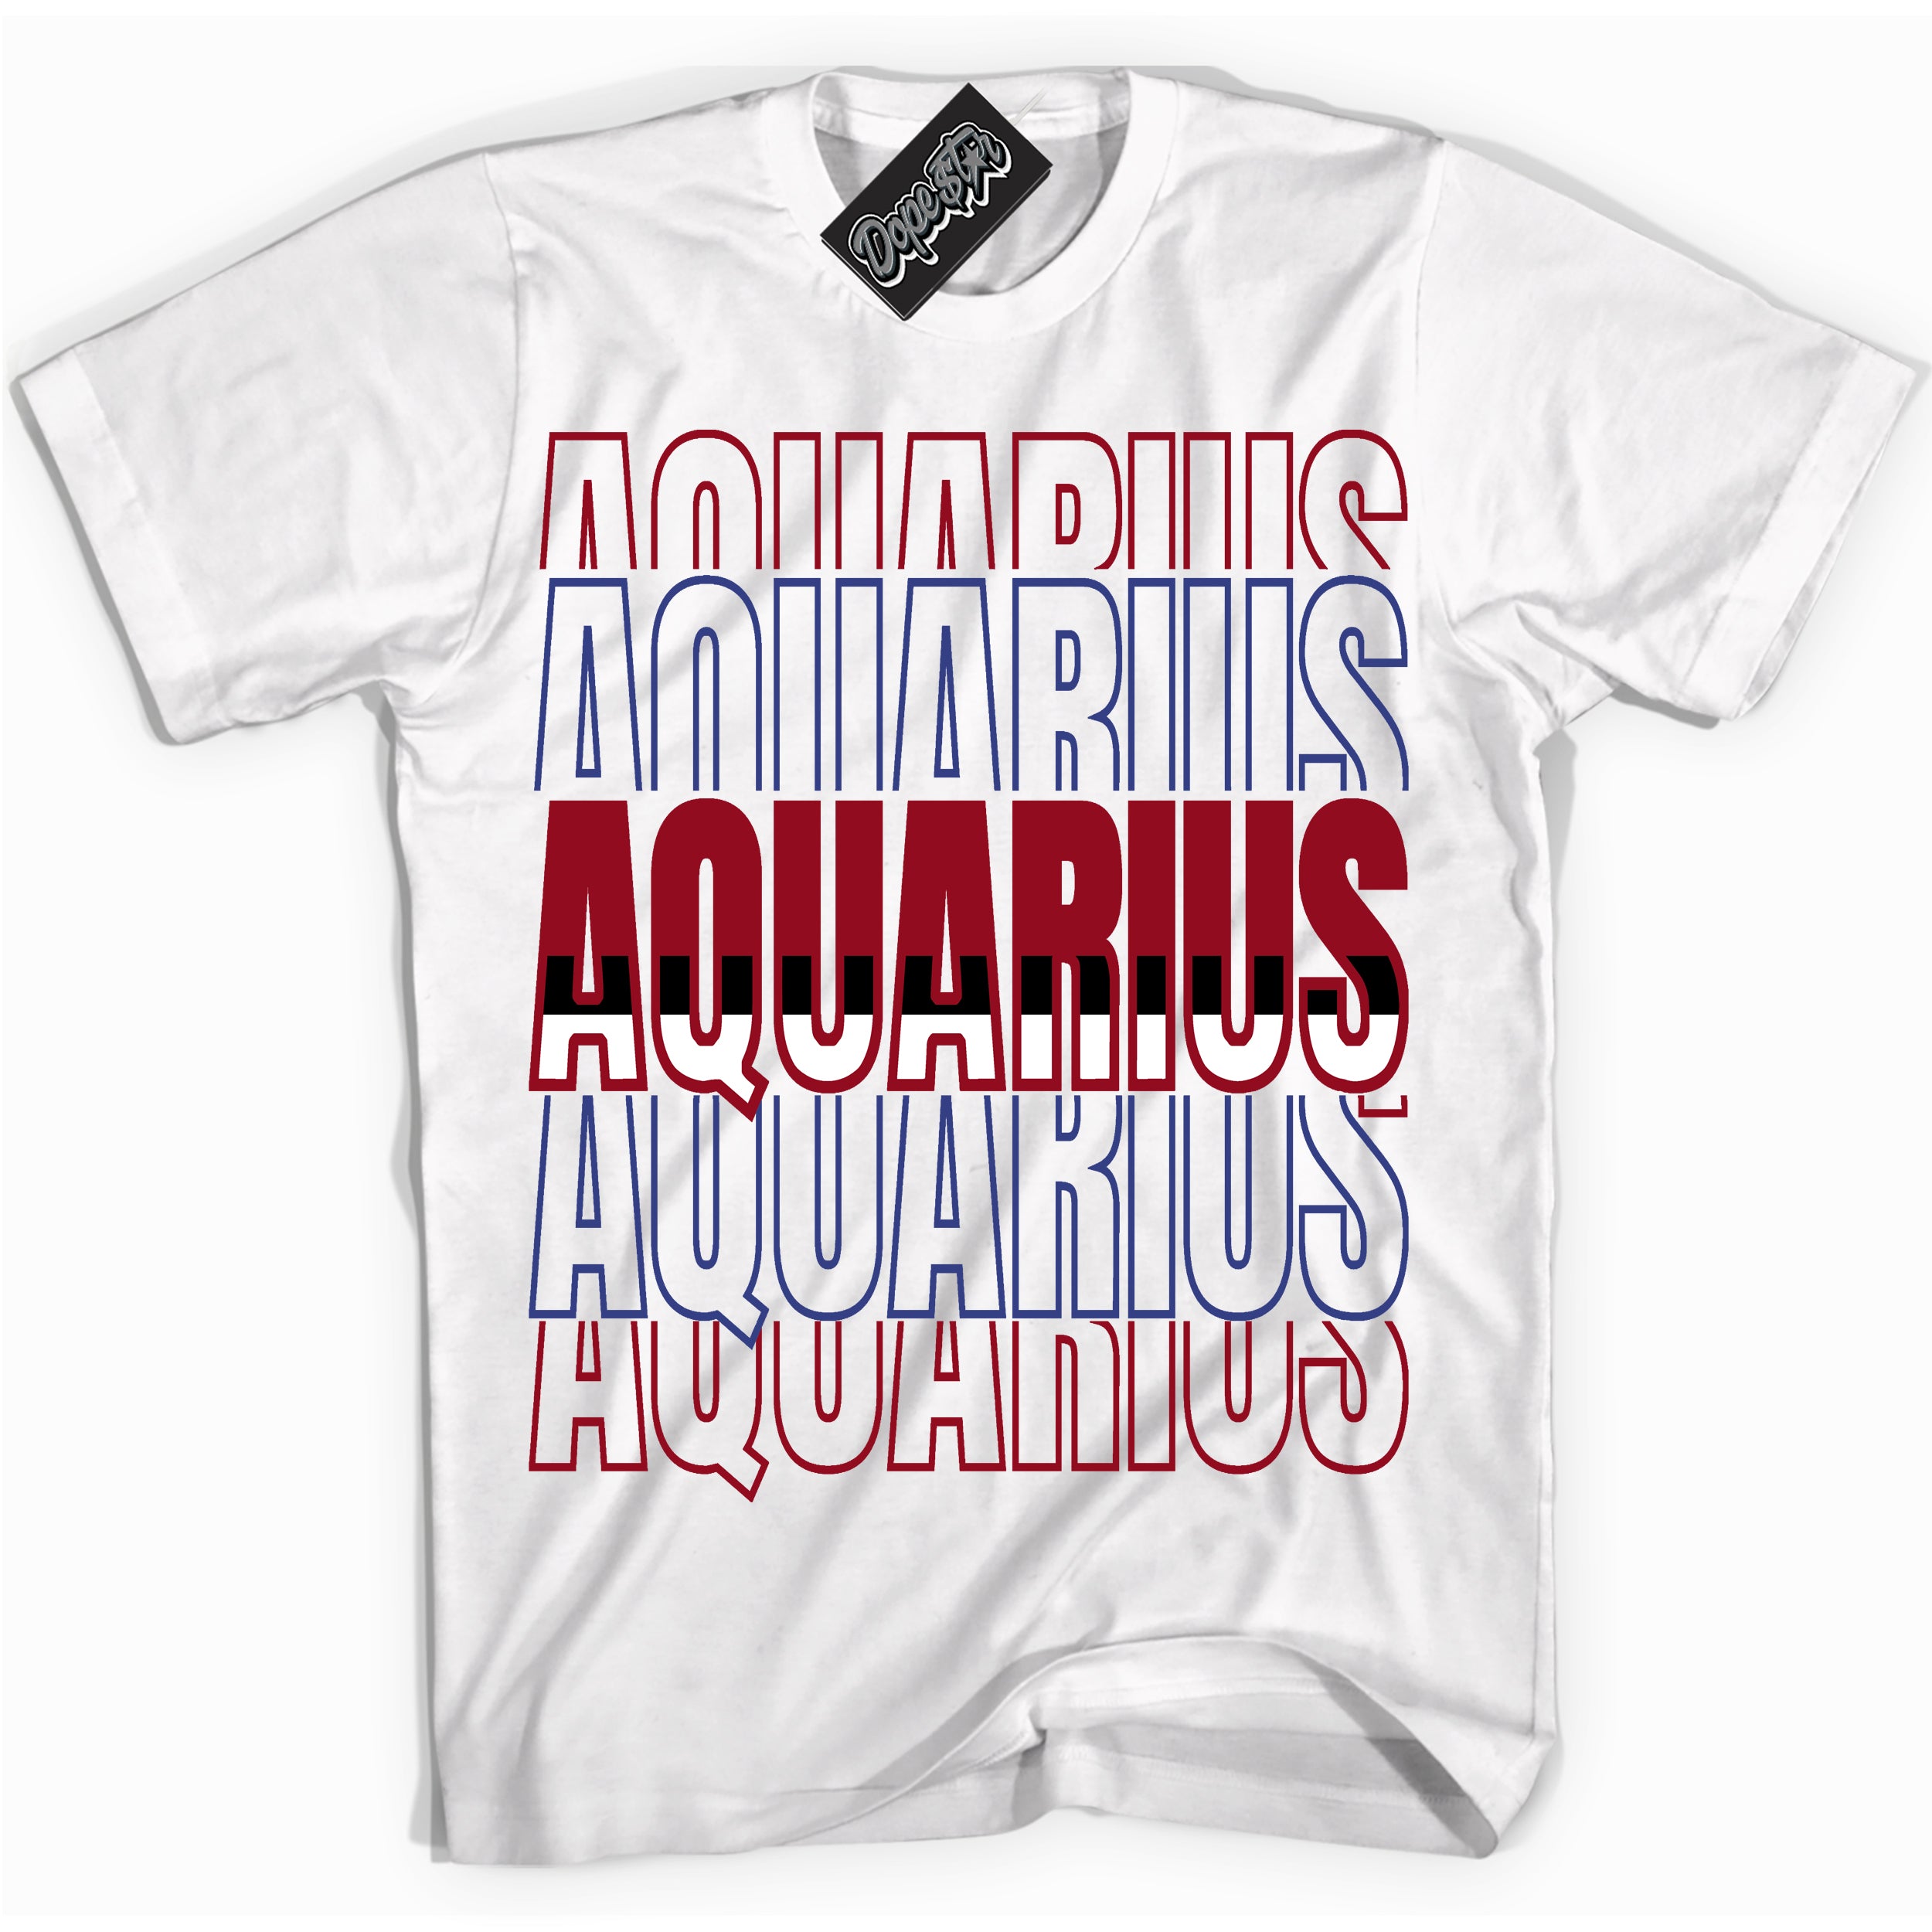 Cool White Shirt with “ Aquarius ” design that perfectly matches Playoffs 8s Sneakers.